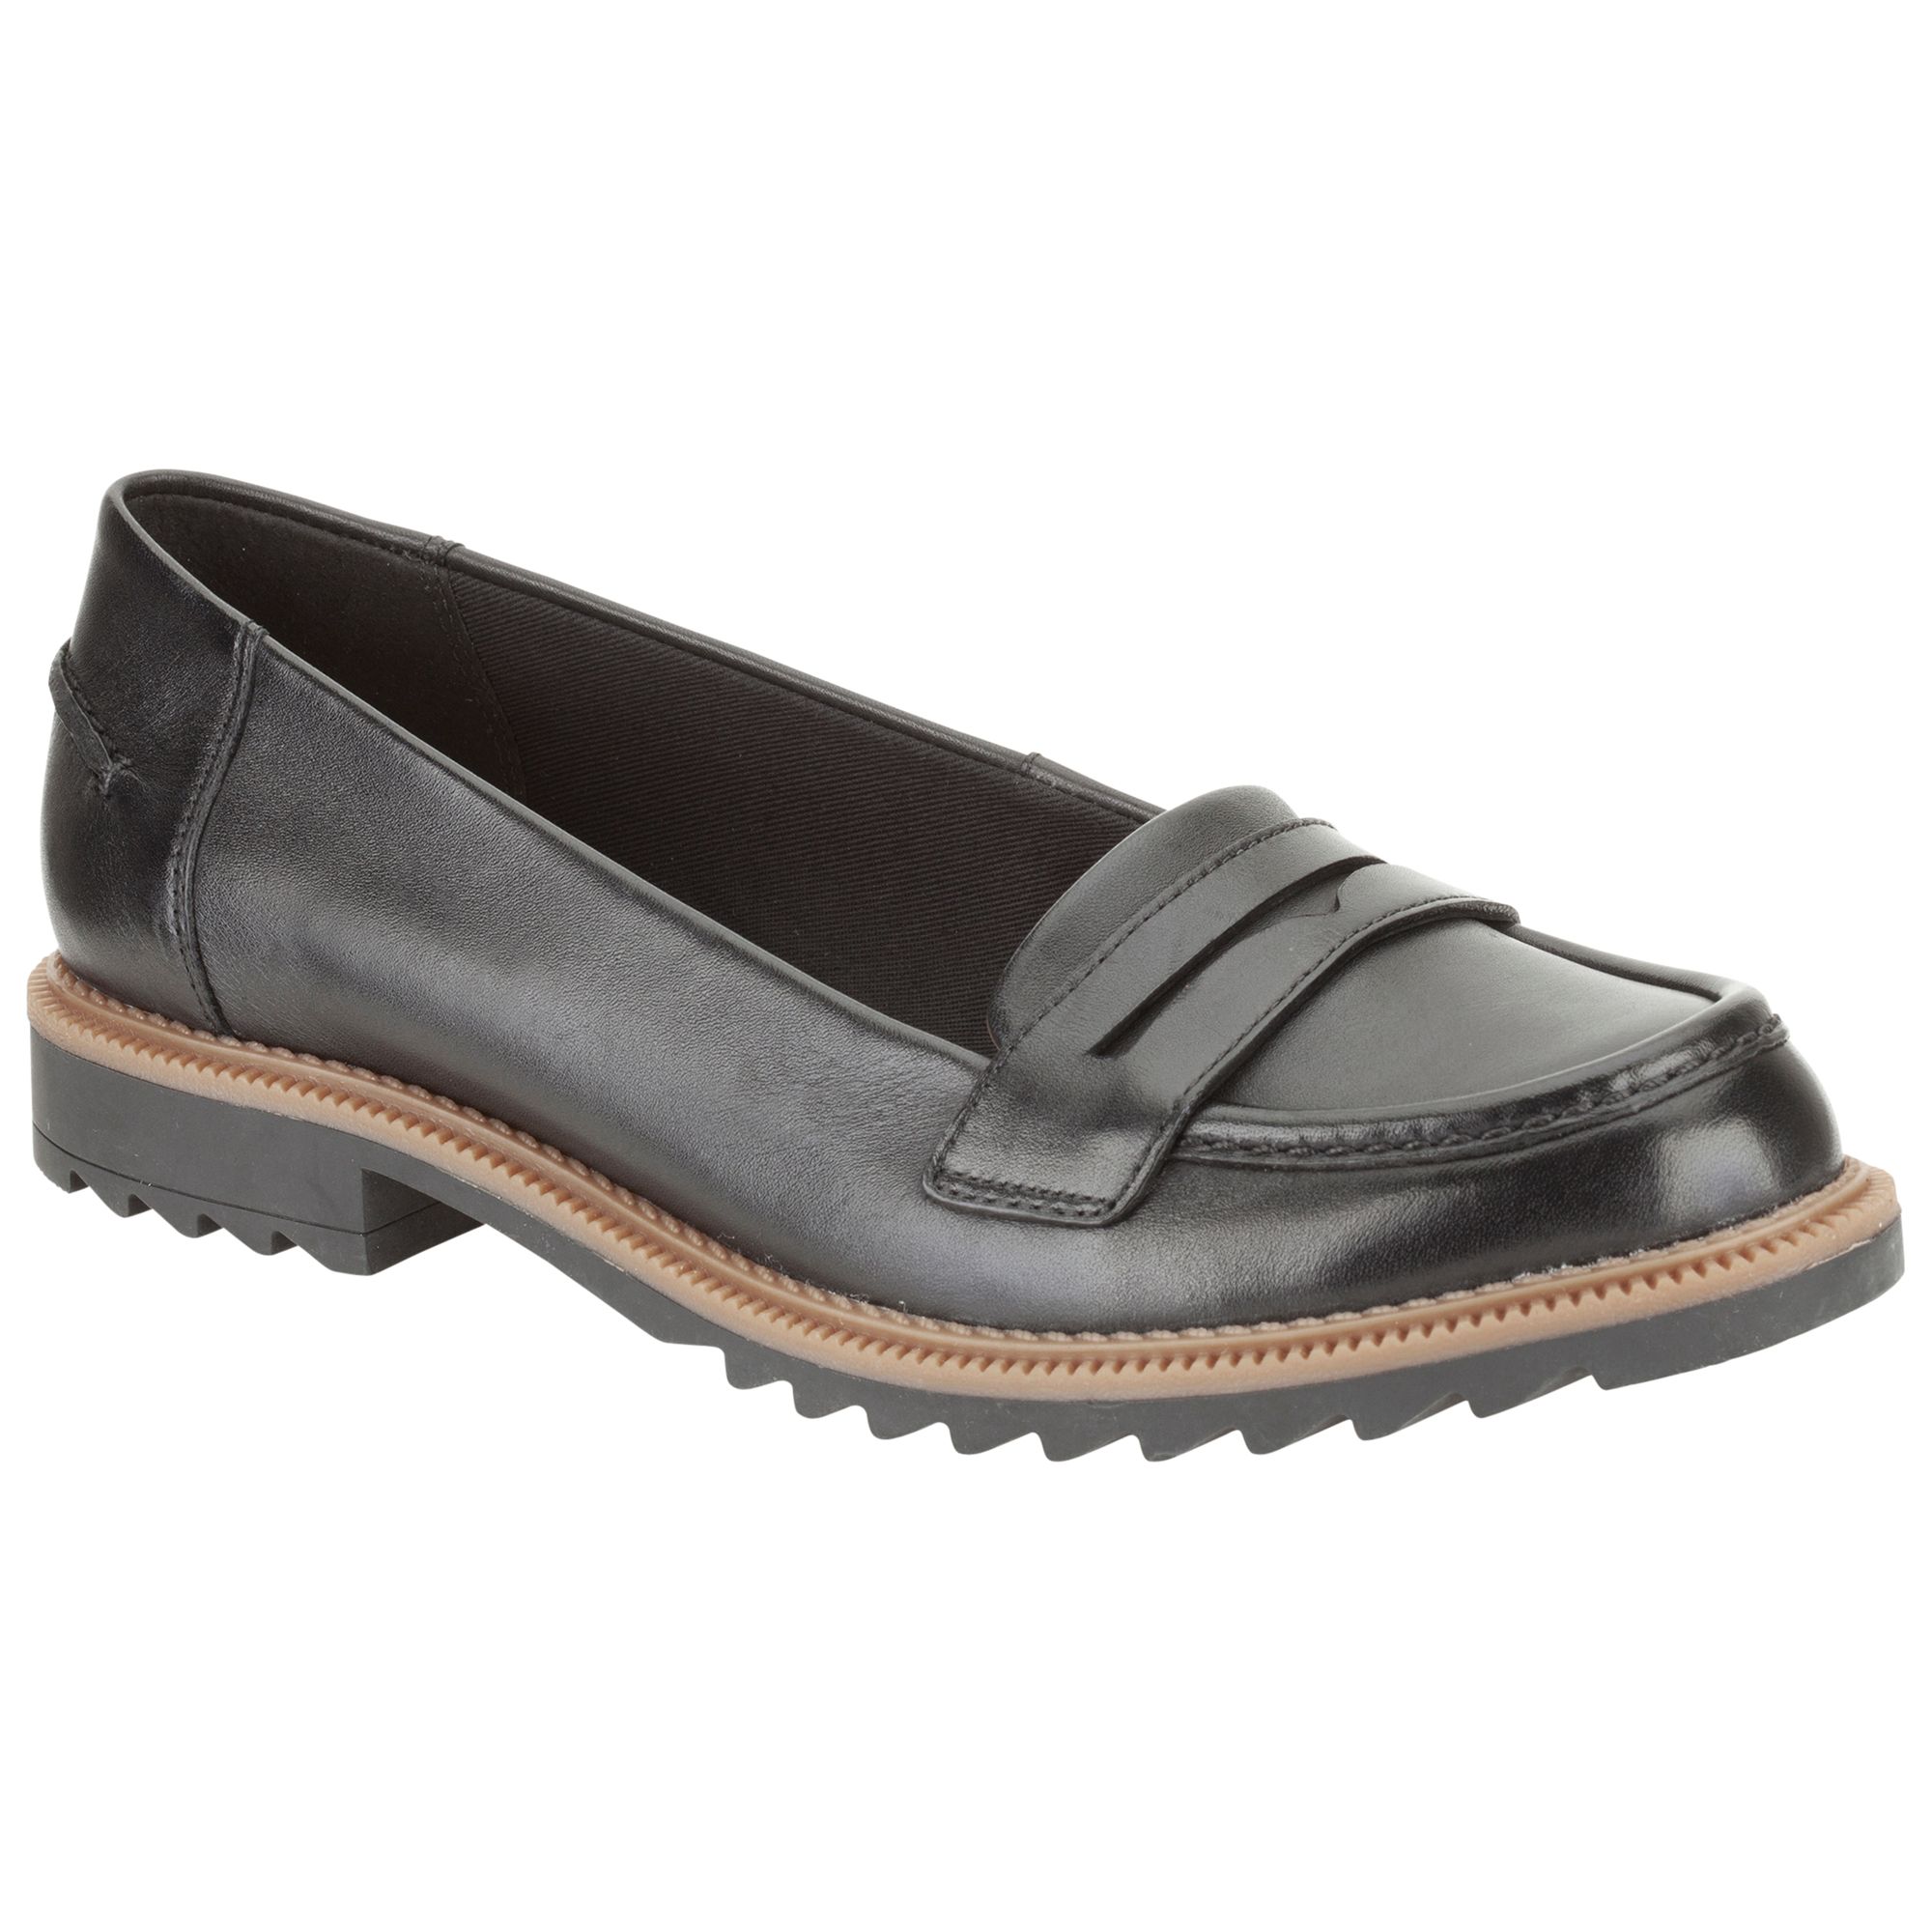 Clarks Griffin Milly Loafers, Black Leather at John Lewis & Partners